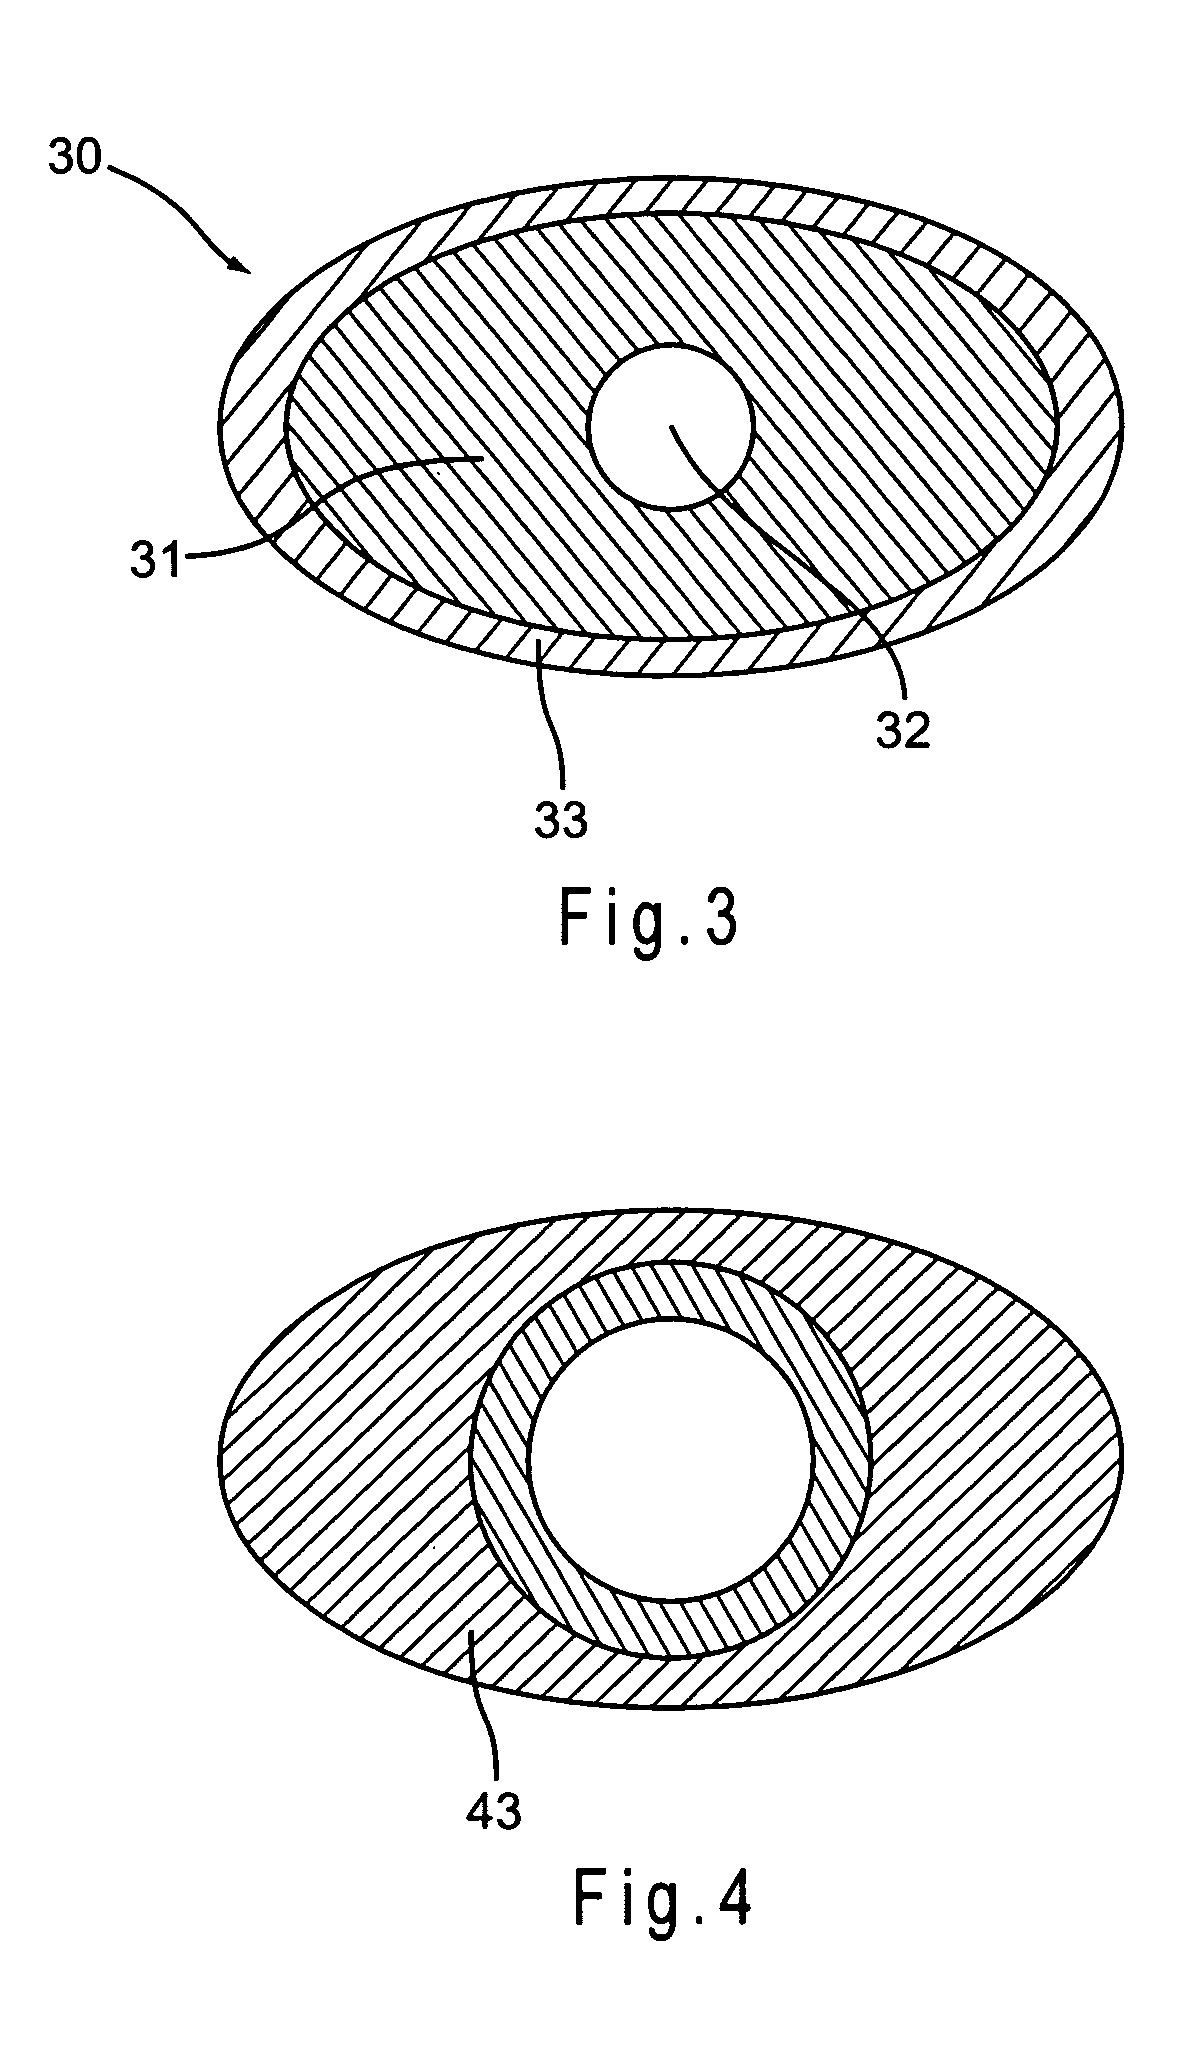 Implantable medical device with pharmacologically active ingredient